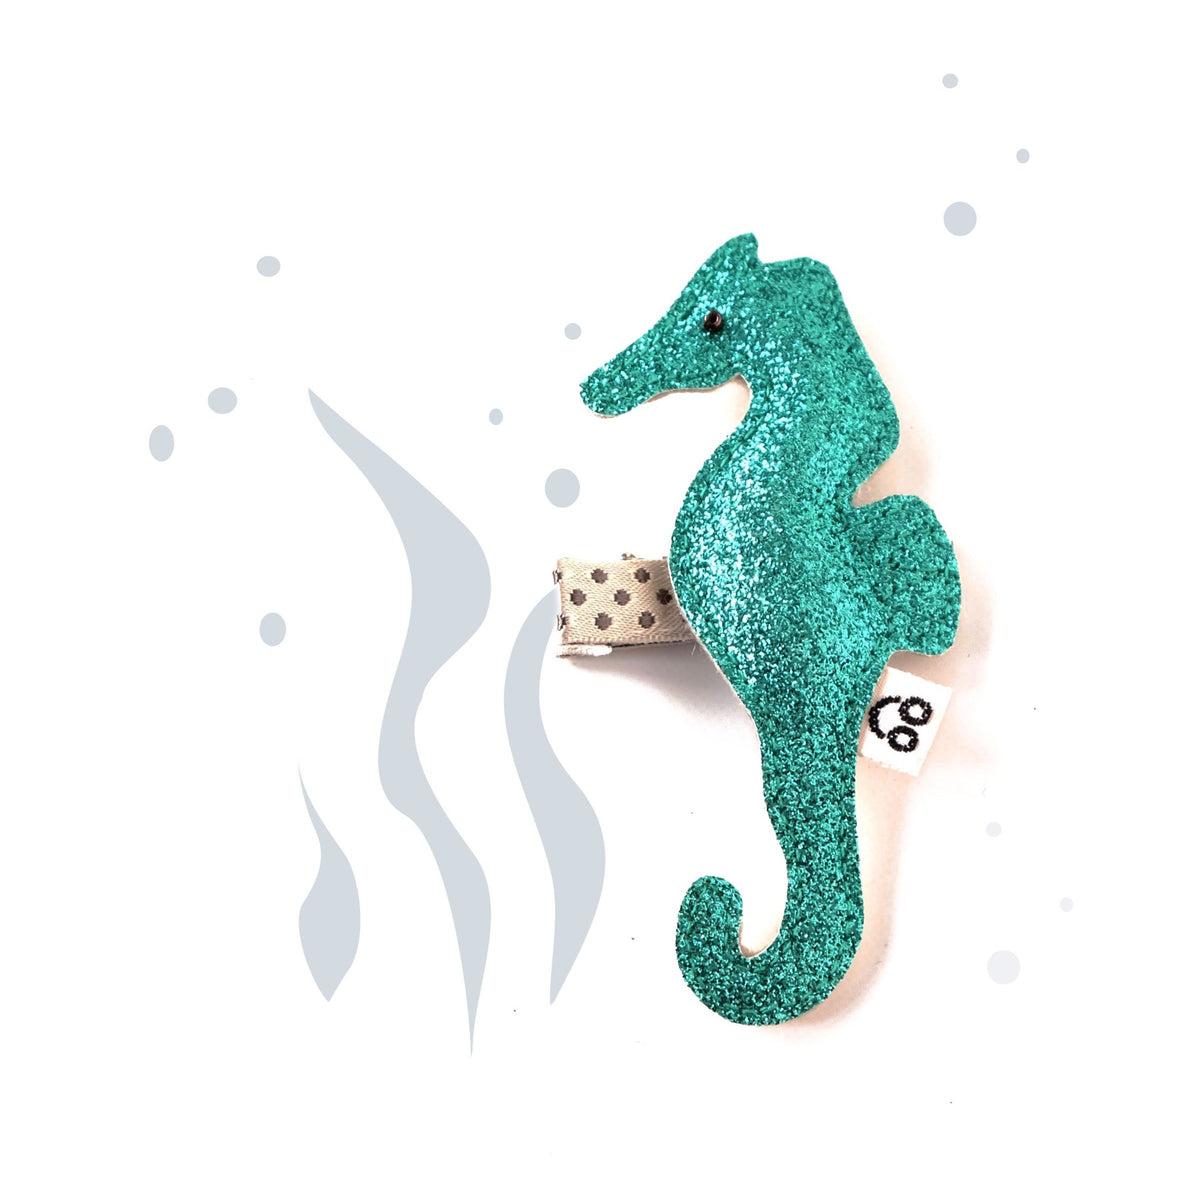 The perfect hair accessory, a sparkly seahorse hair clip, available in gold, silver, blue, or green.